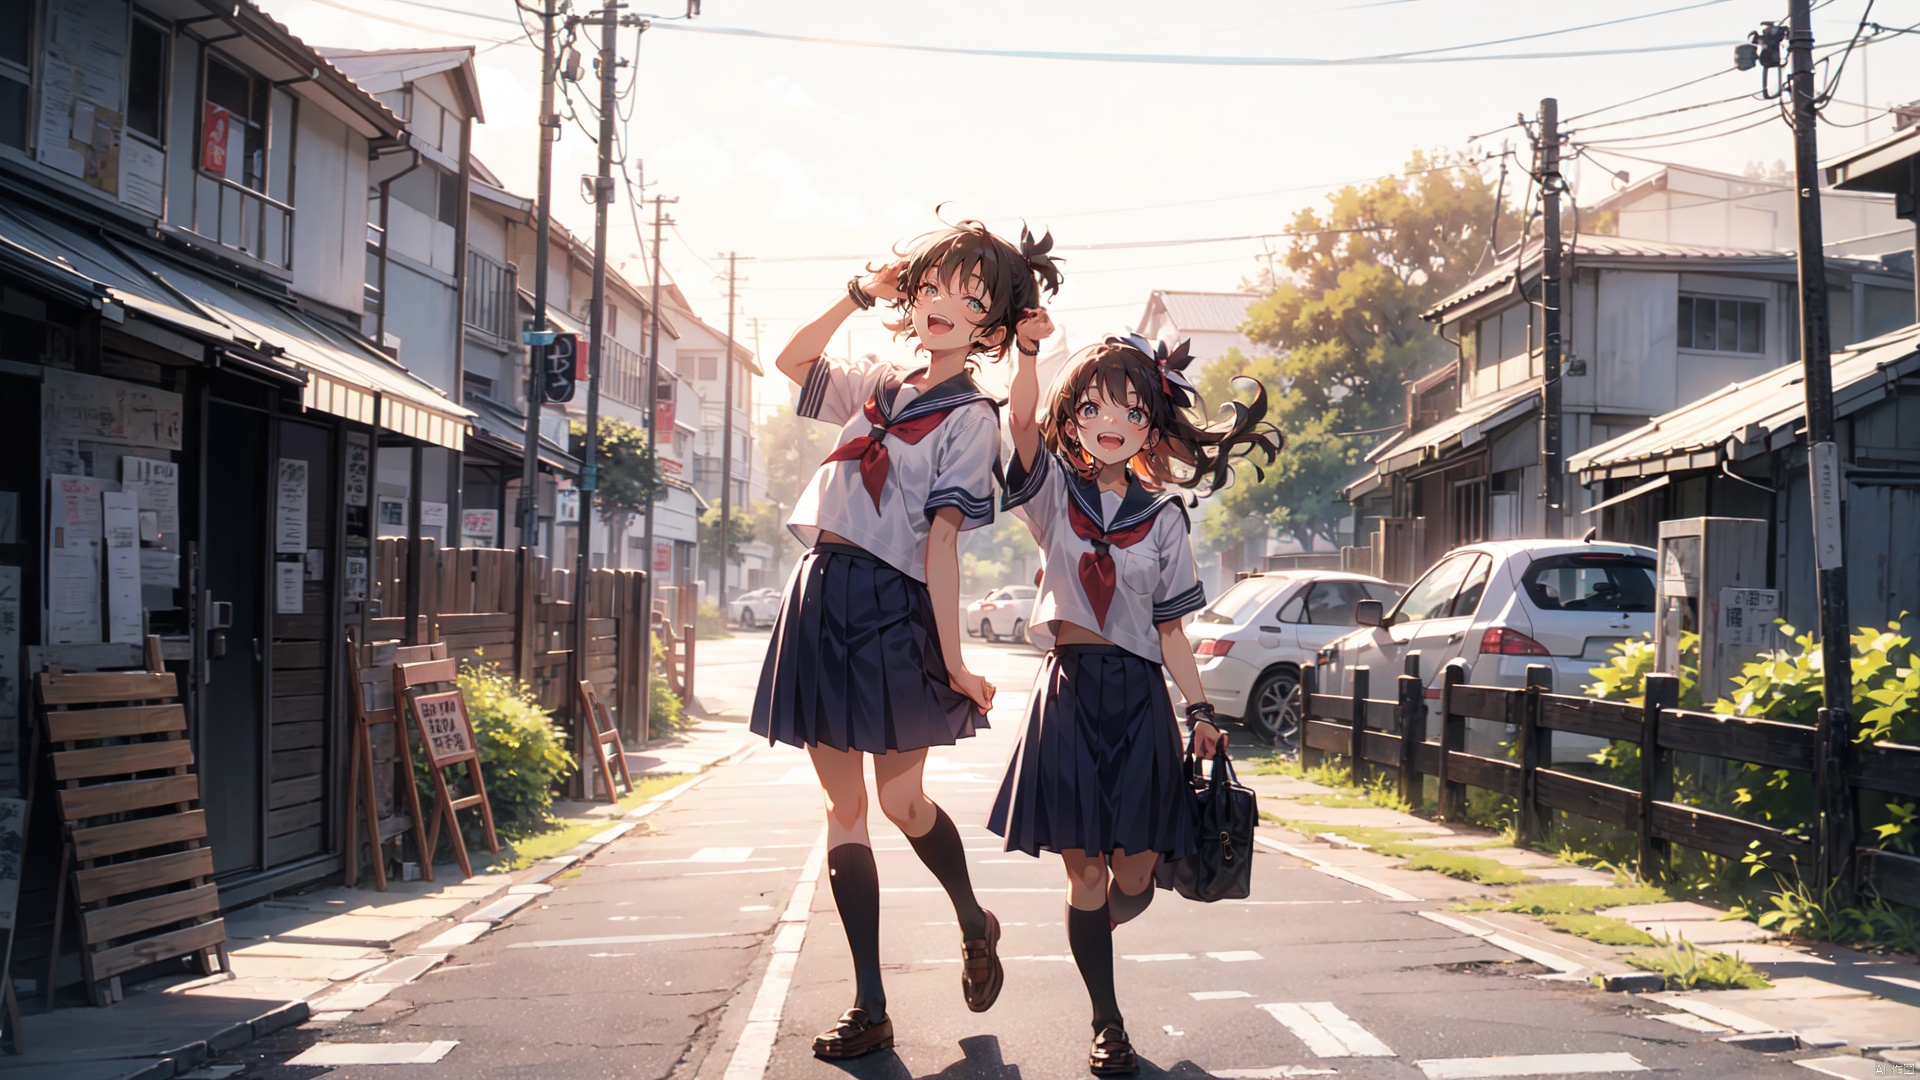  masterpiece,best quality,1girl,very aesthetic,year 2023,saten ruiko,toaru majutsu no index ,Town of Kobe,Japan,animation,school uniform,Laughing,cute,Beautiful Backgrounds,Cute pose,Cinematic Views,smiling,strong wind,annoying,8K, cozy anime